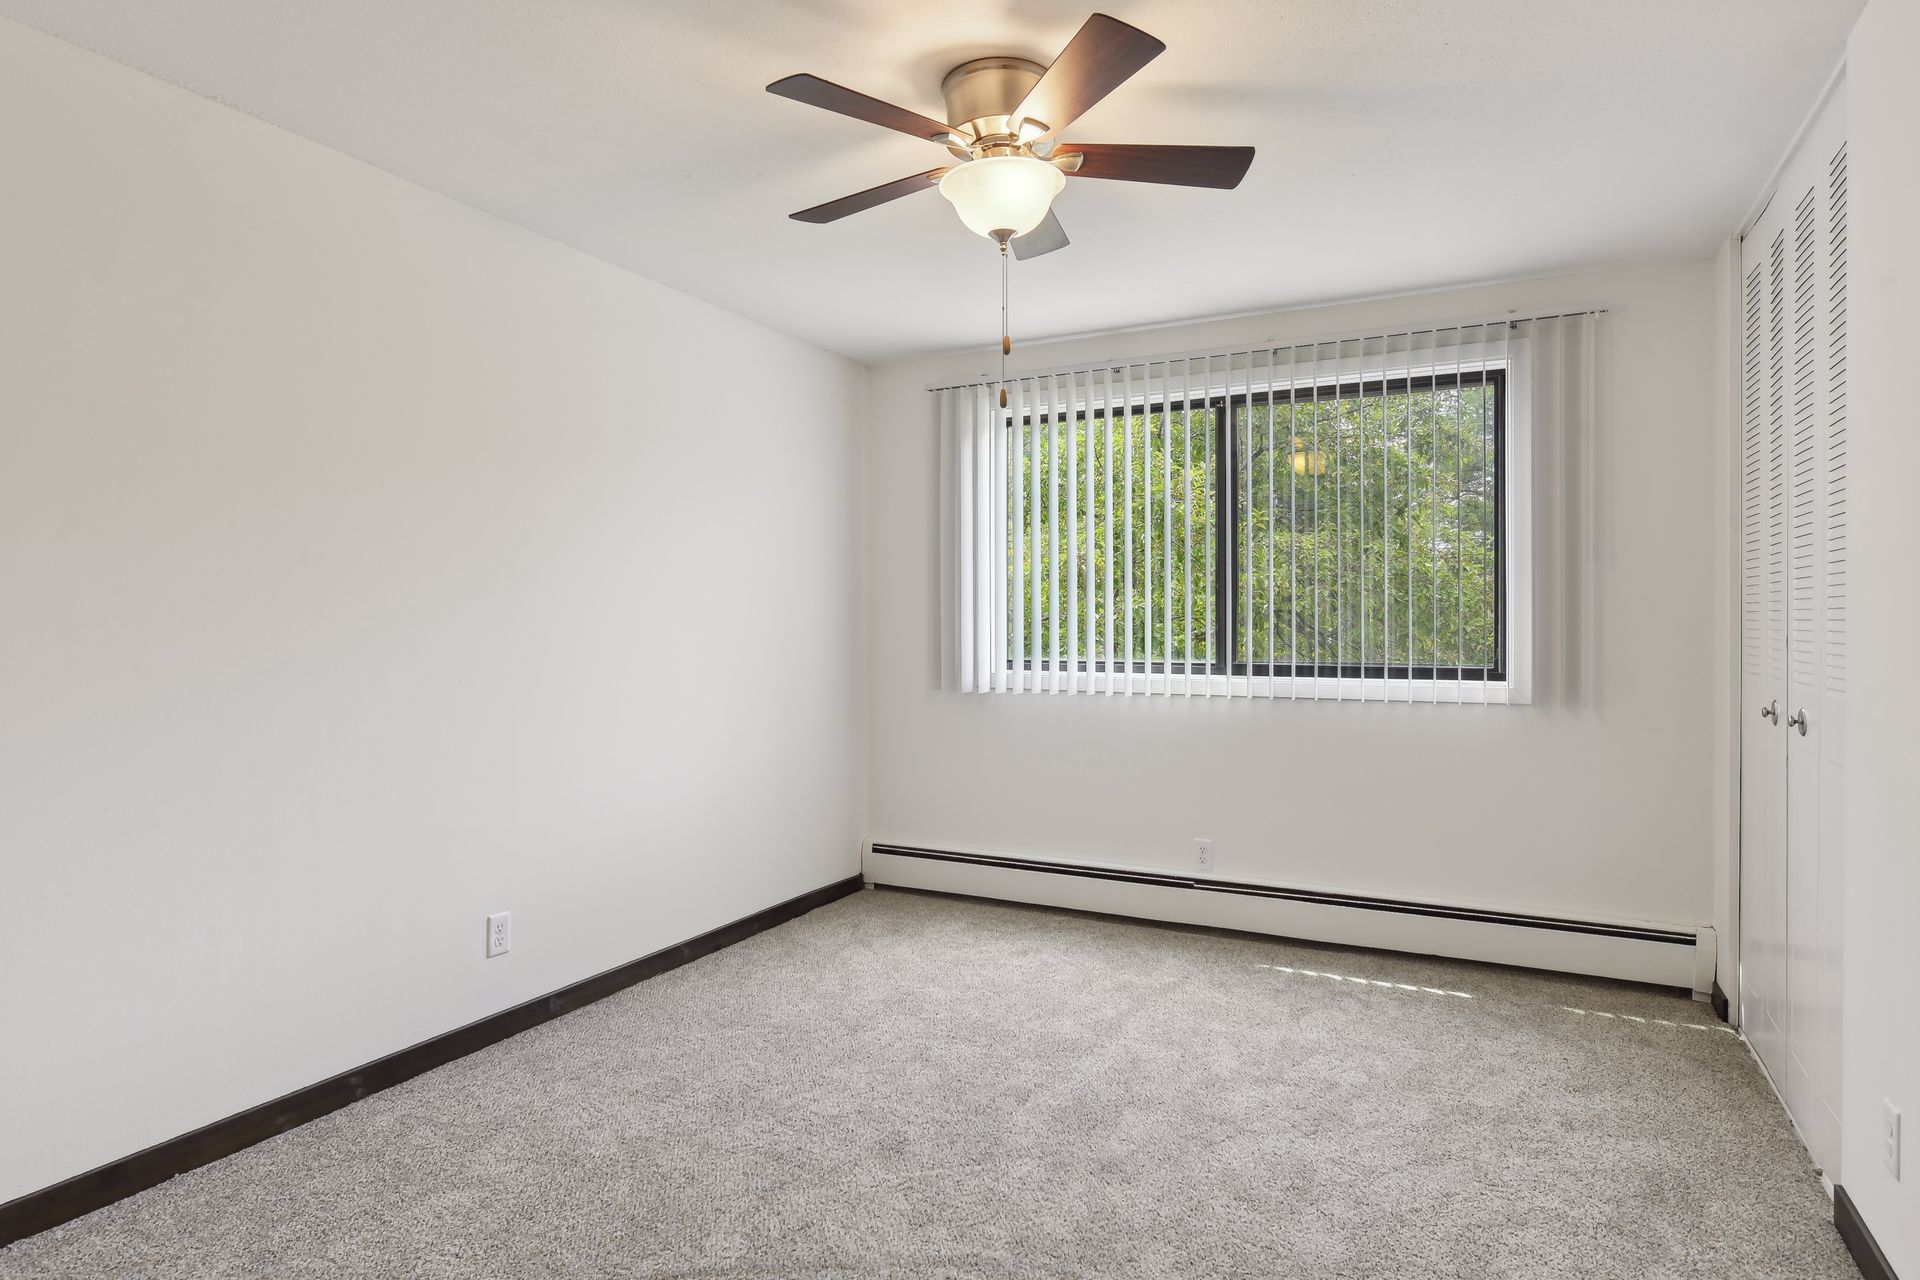 Bedroom with large window and ceiling fan